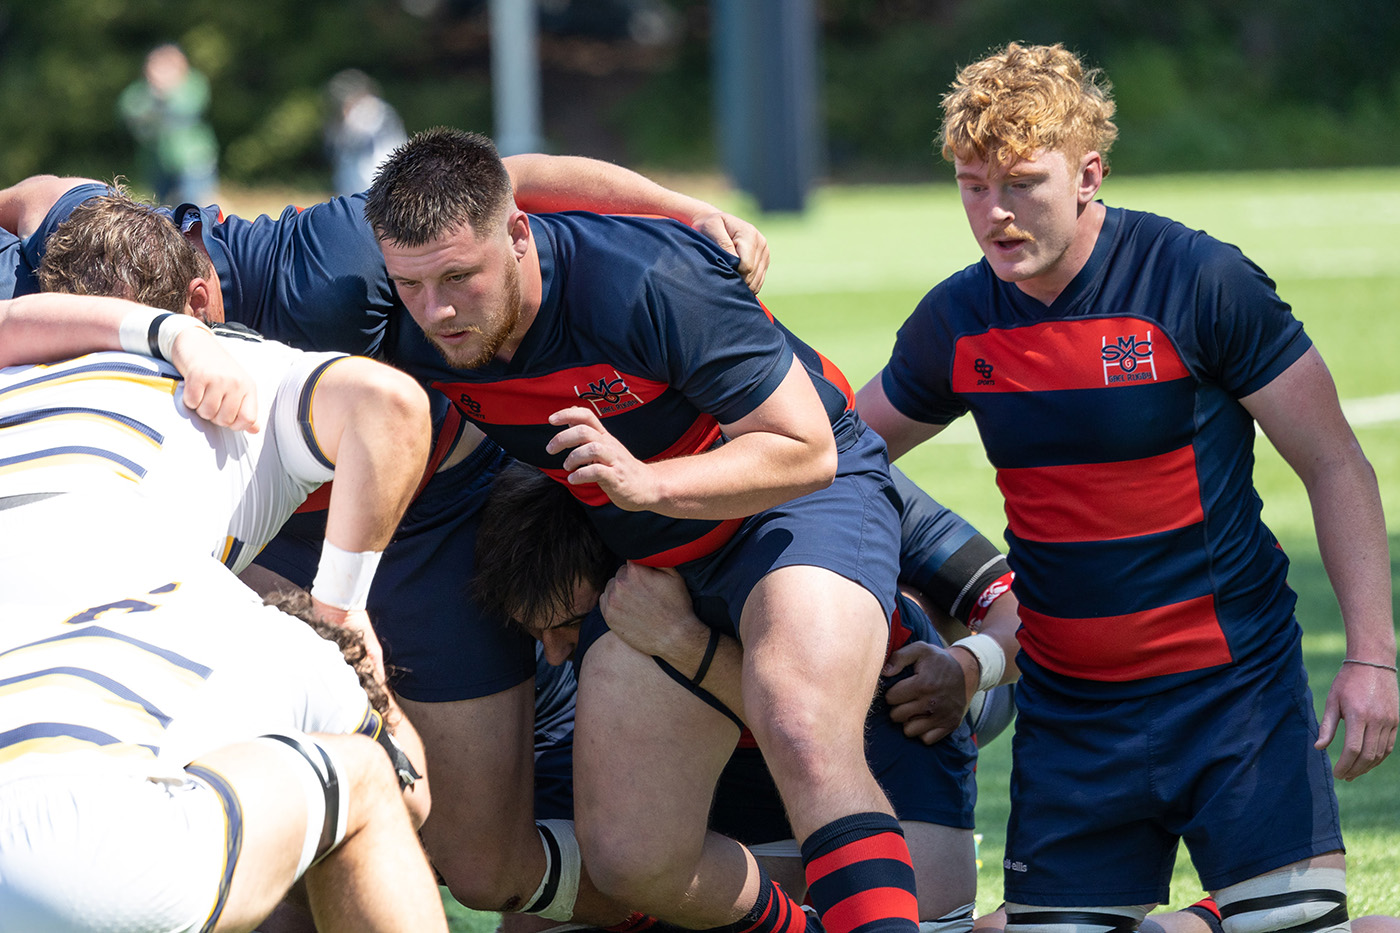 Saint Mary's rugby players  Hunter Chuhlanrtseff on the left and Ronnie McElligott on the right prepare for a scrum against UC Berkeley March 25, 2023